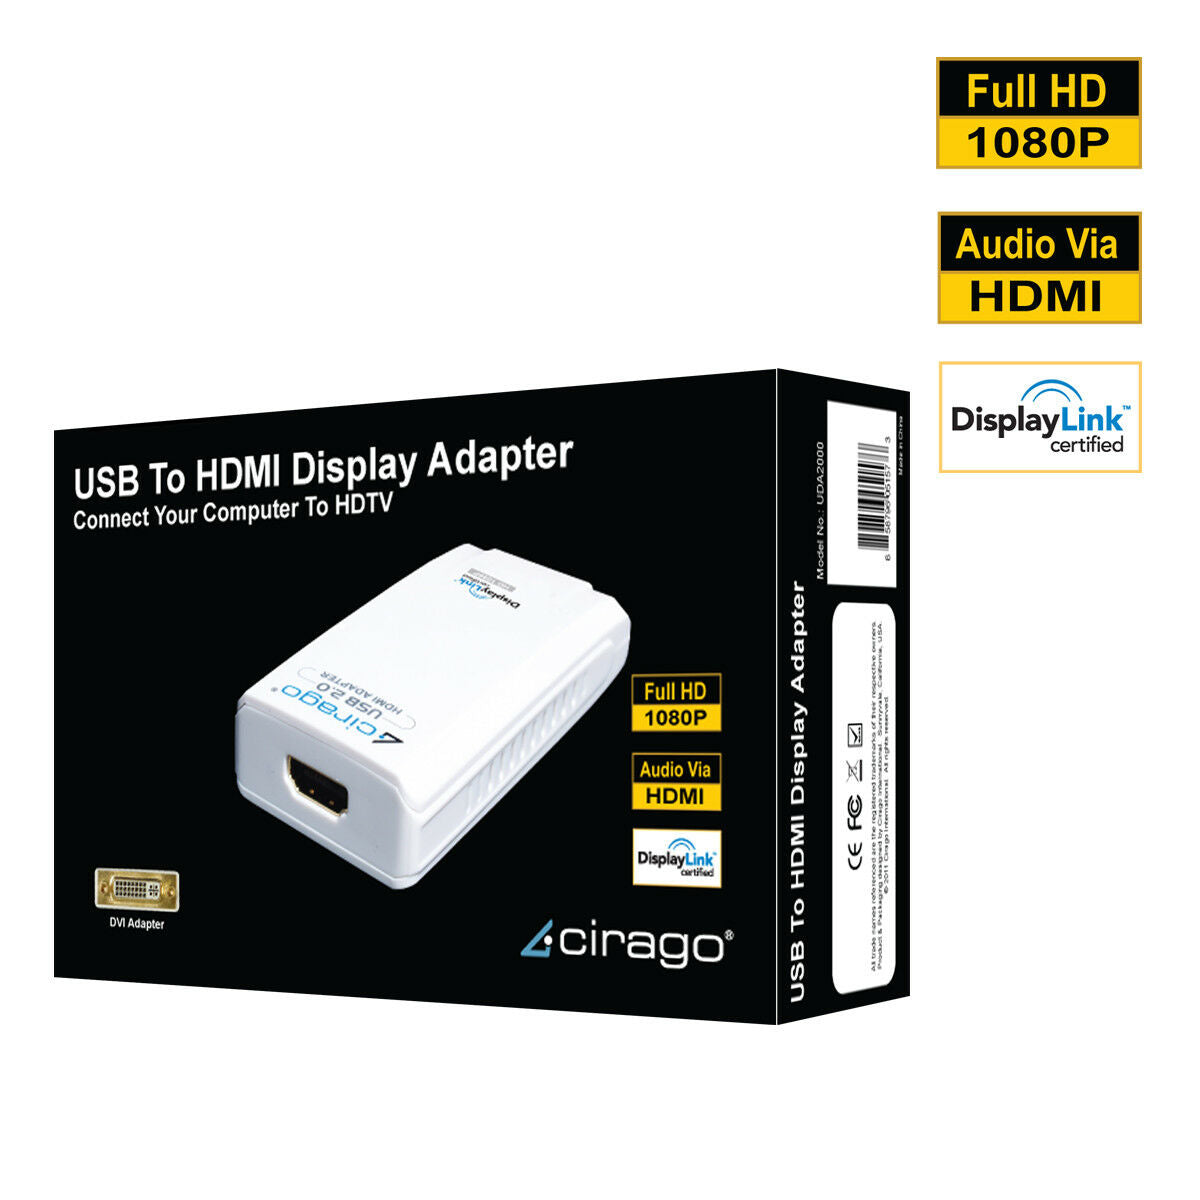 Cirago USB to HDMI or DVI Display Adapter DisplayLink Certified Plug and Play